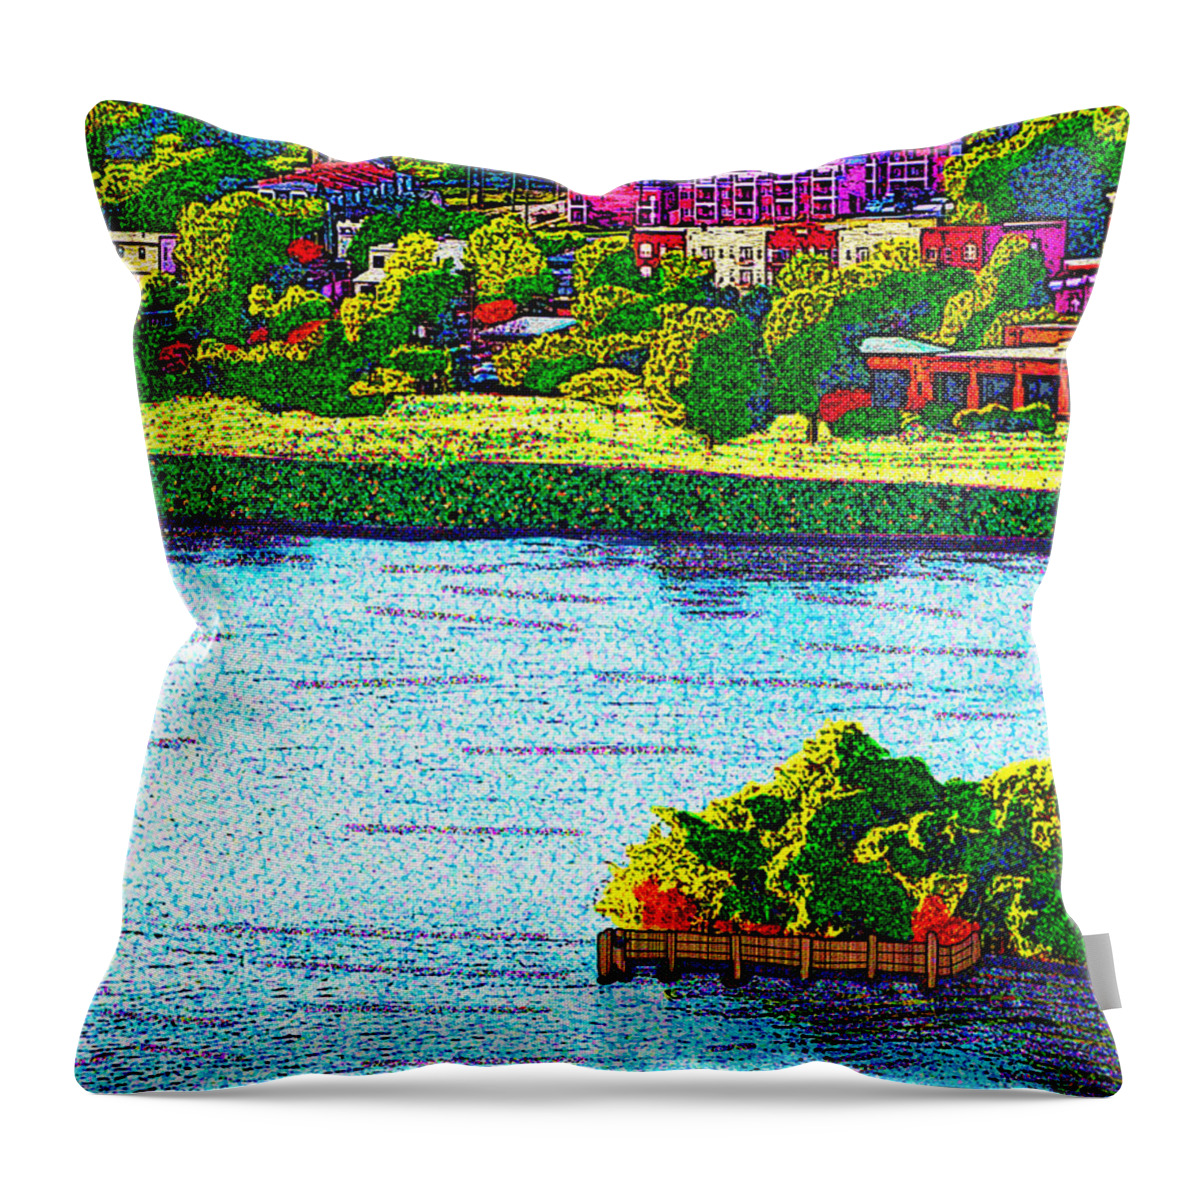 Chattanooga Throw Pillow featuring the digital art Bluff View 2 by Rod Whyte